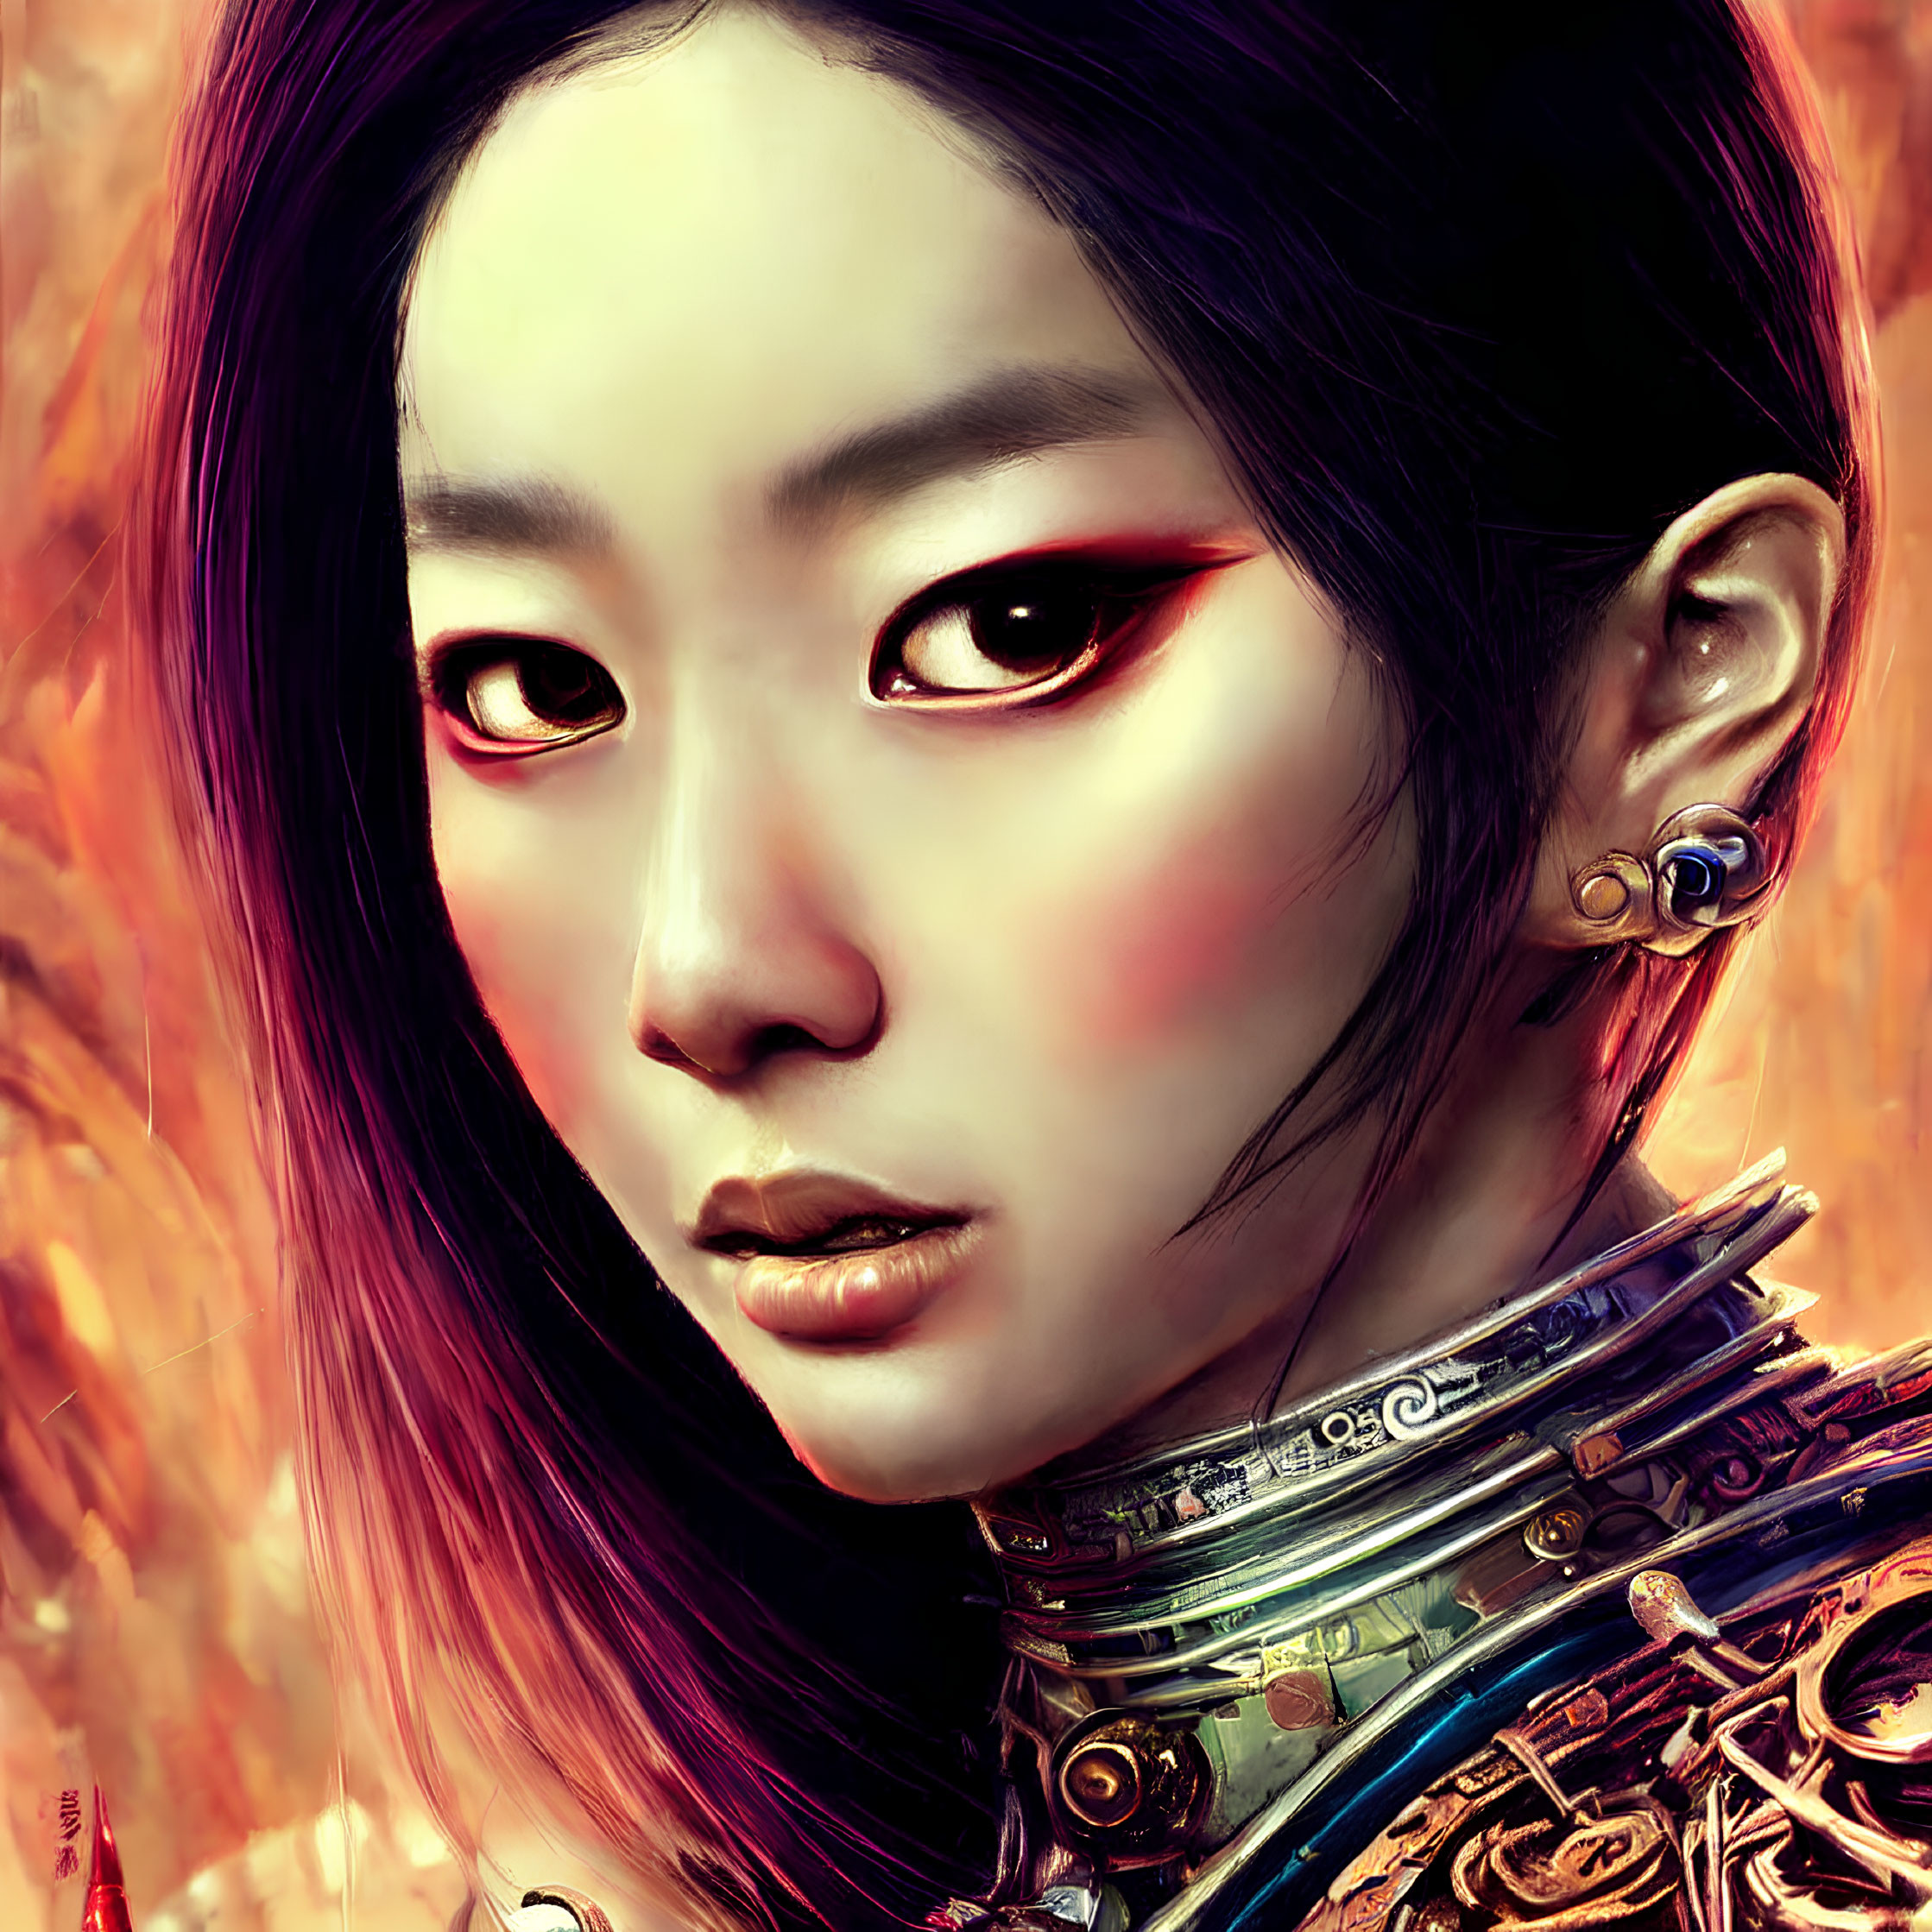 Detailed digital portrait of woman in metallic armor and red makeup against fiery backdrop